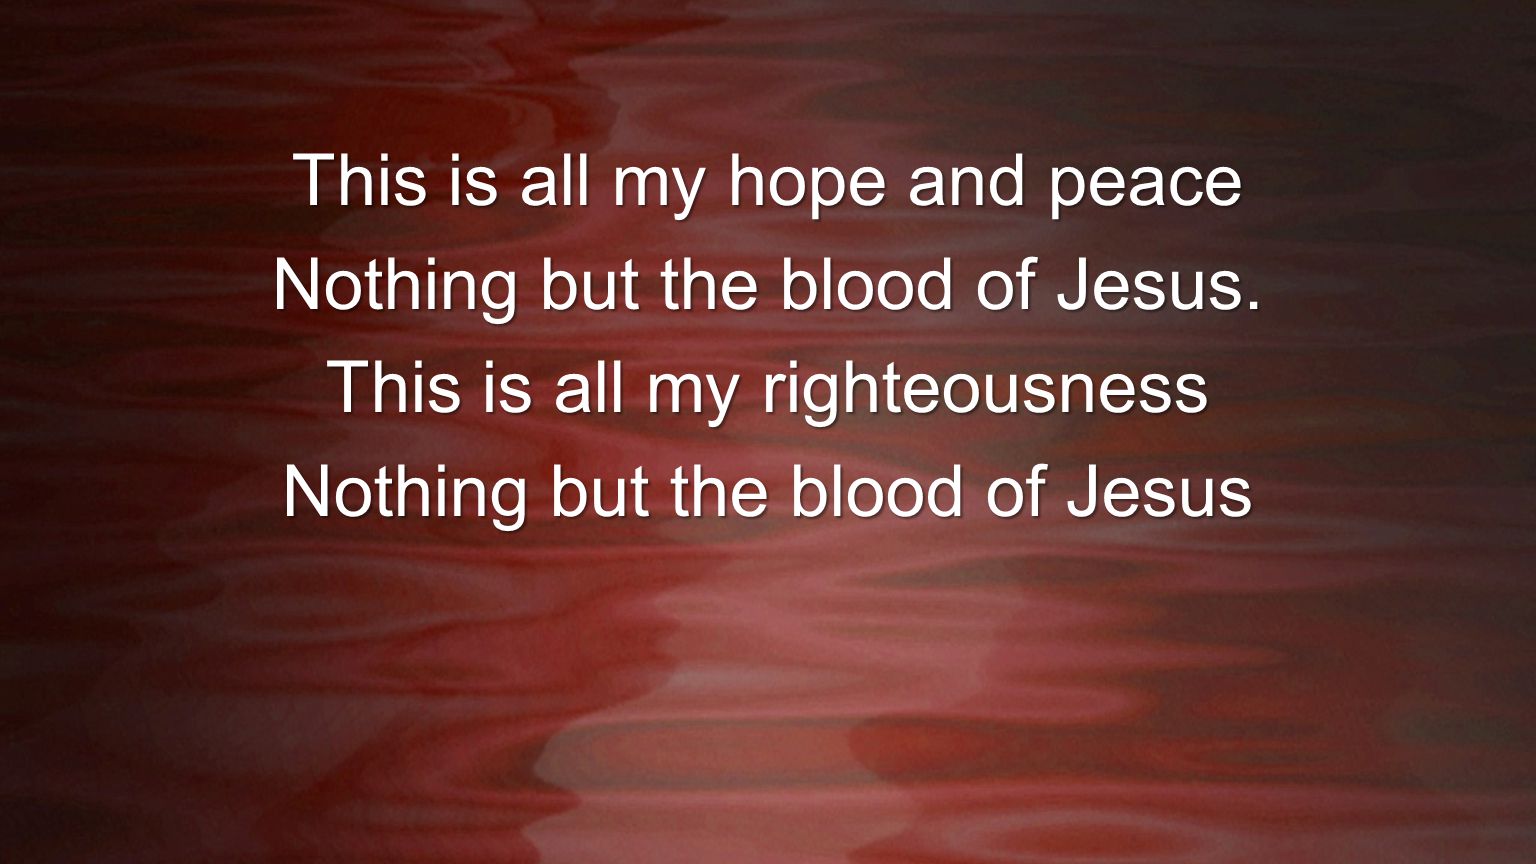 This is all my hope and peace Nothing but the blood of Jesus.